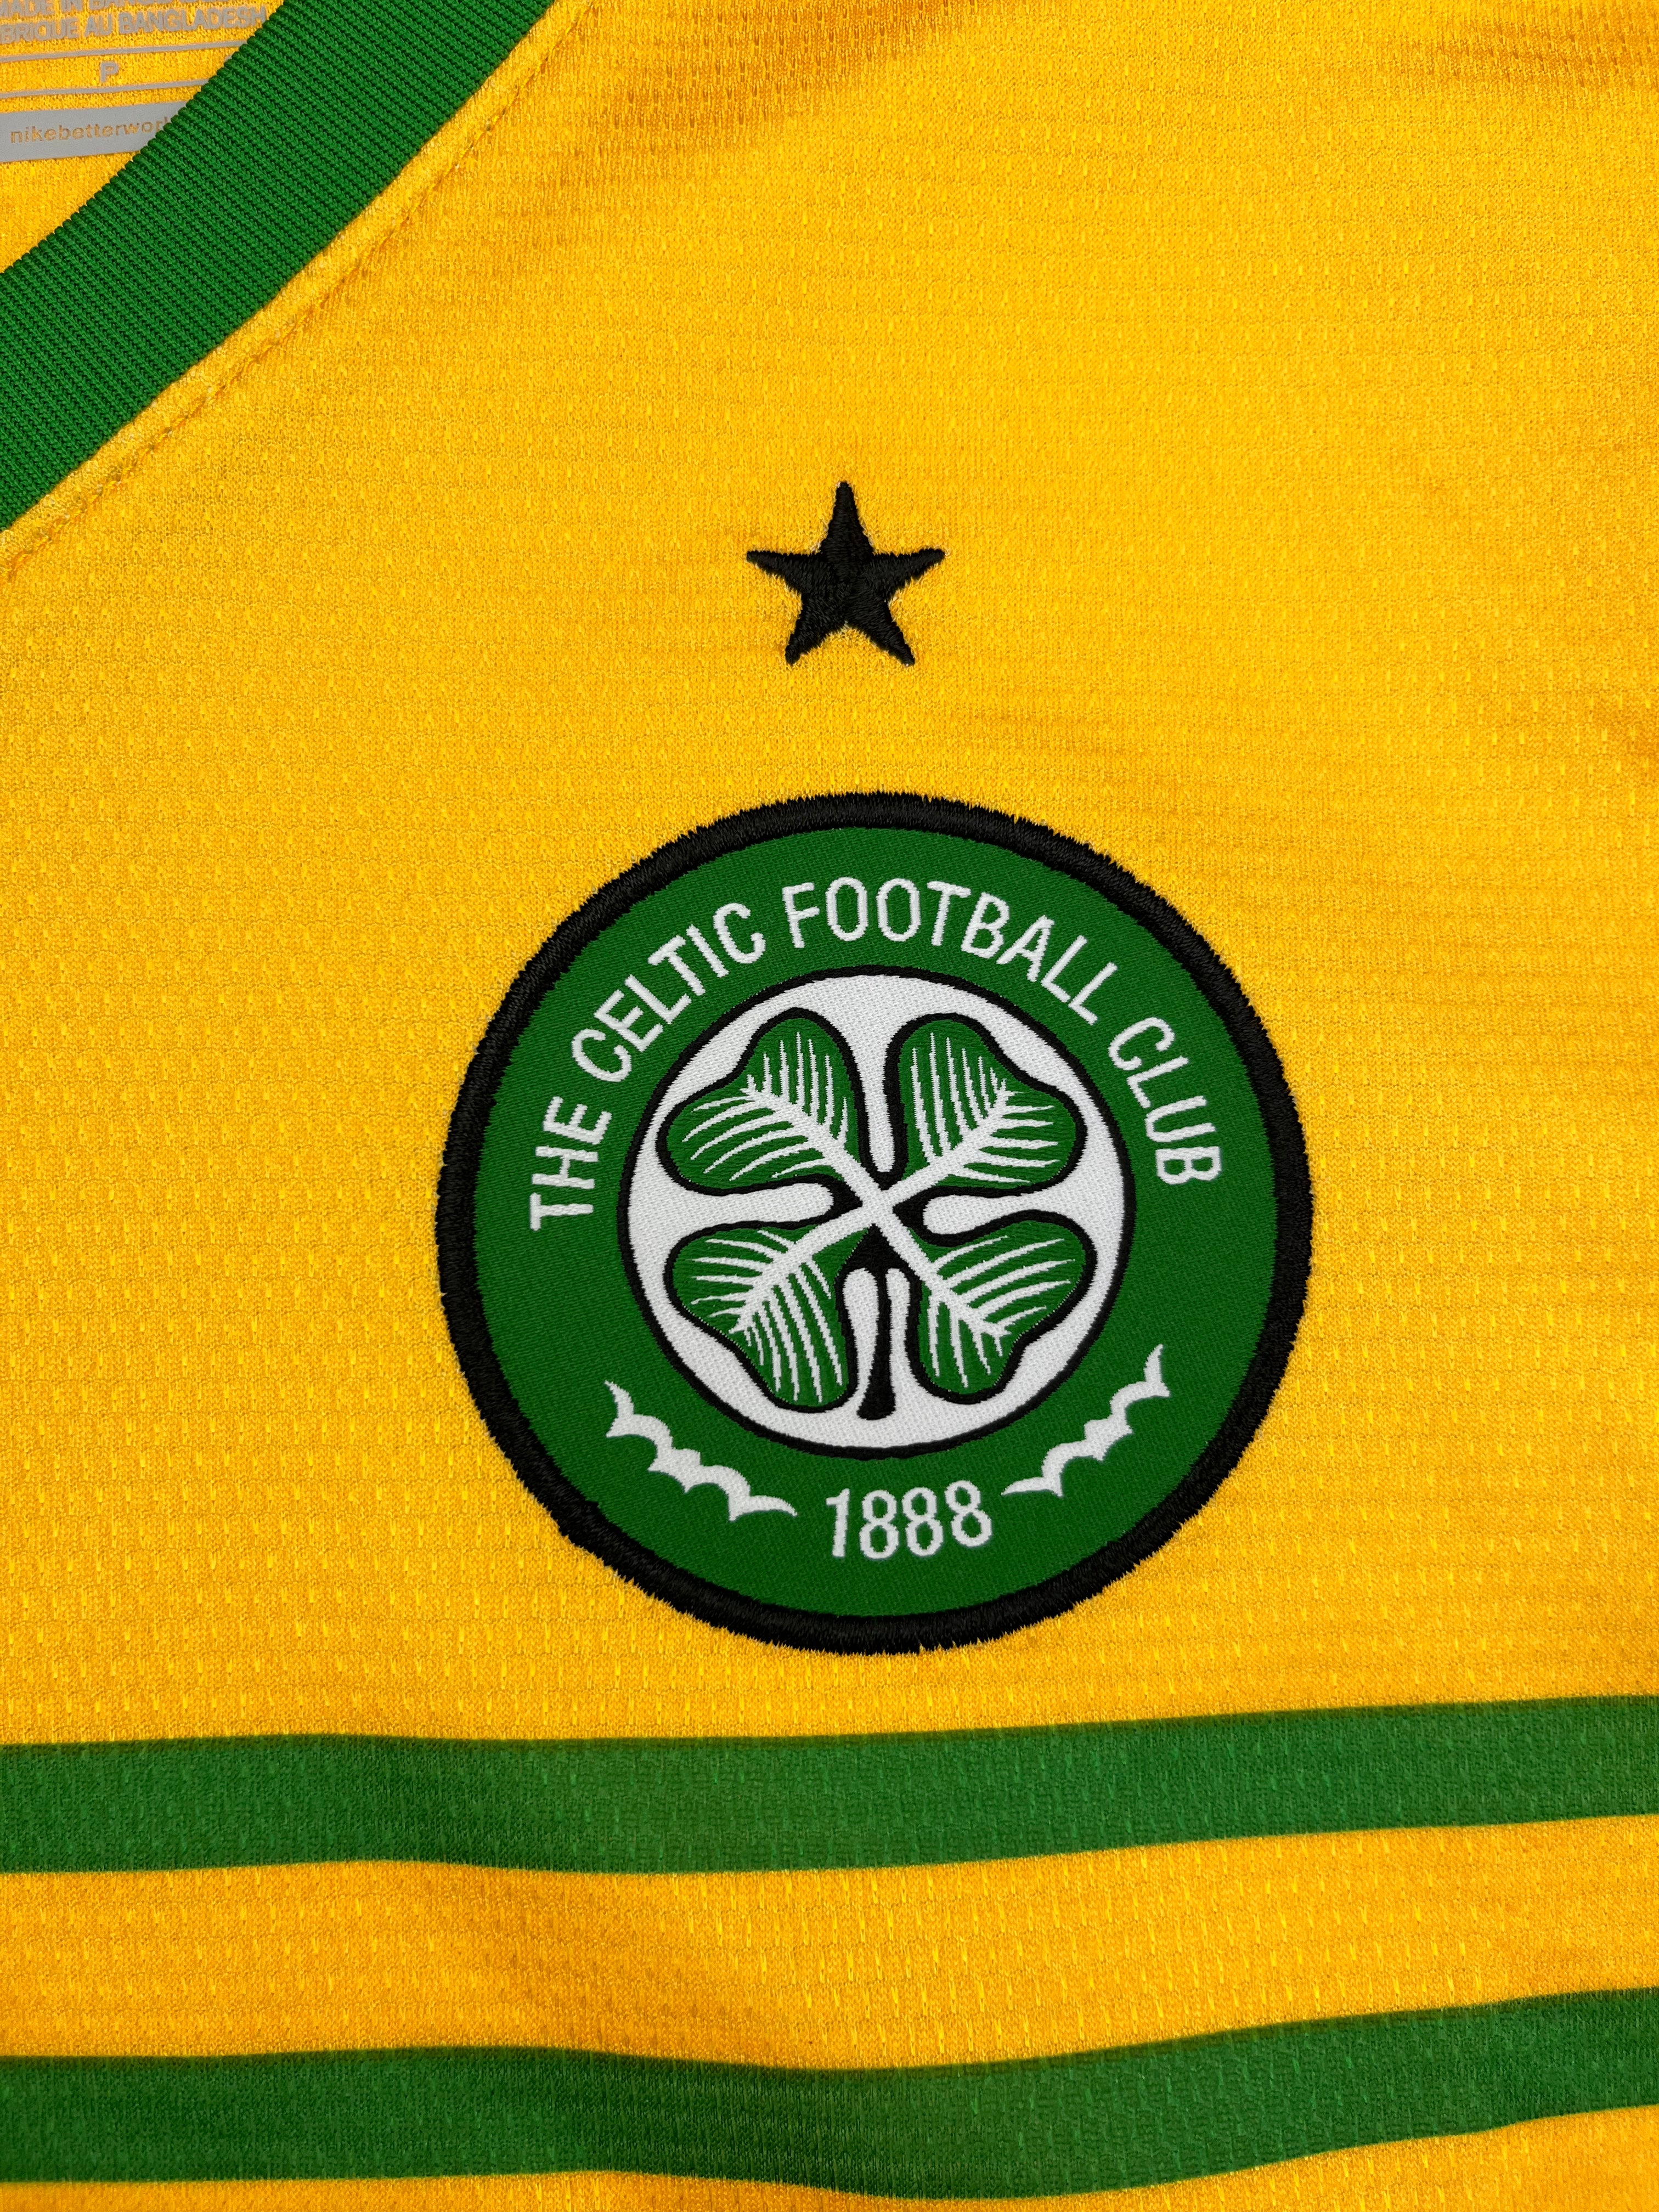 Away Top 2013-14 – The Celtic Wiki